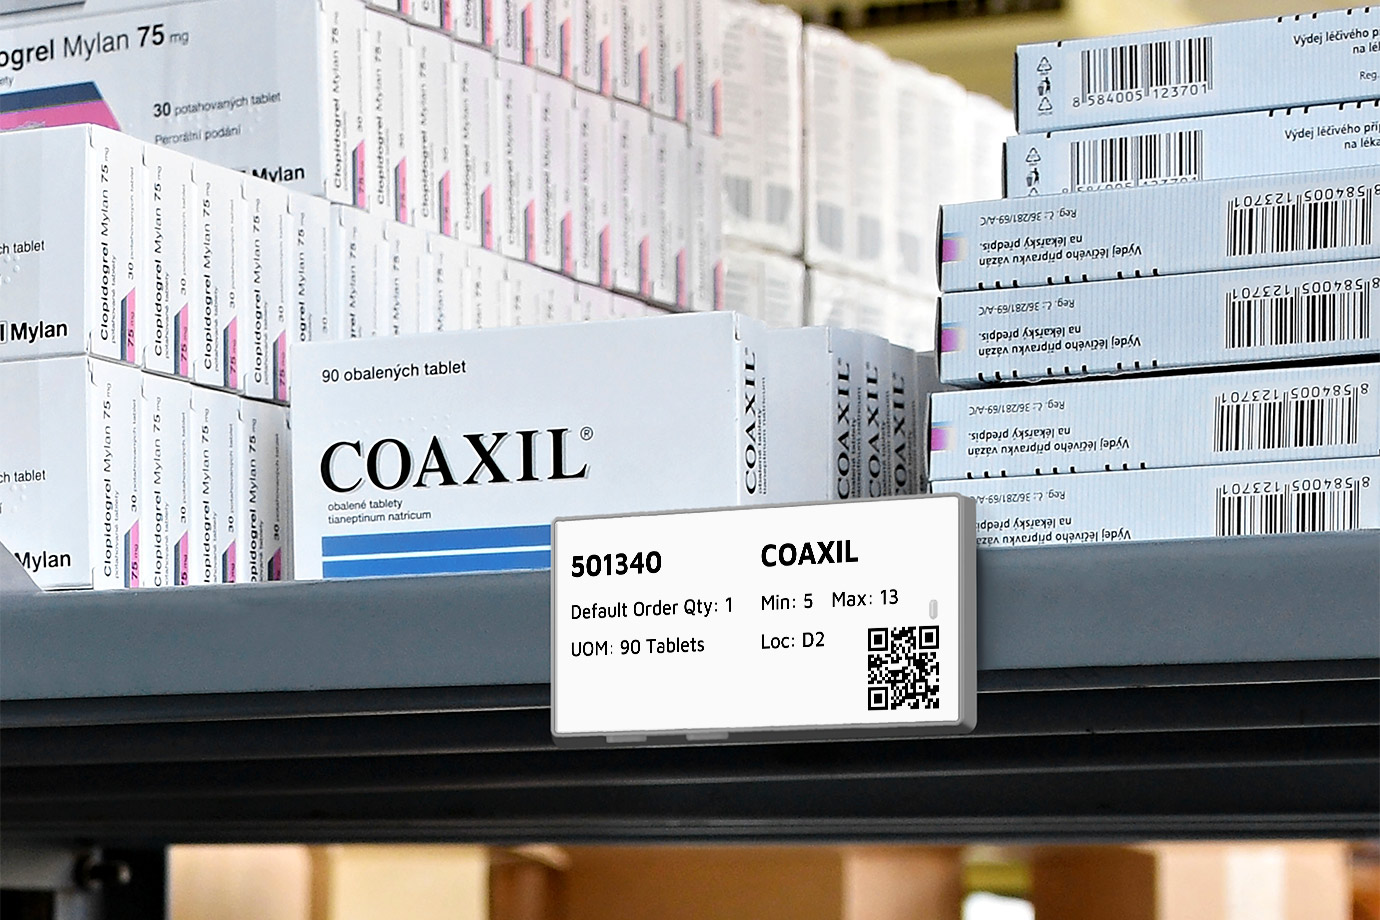 Solum electronic shelf label displaying min max levels and a QR code of medical supplies